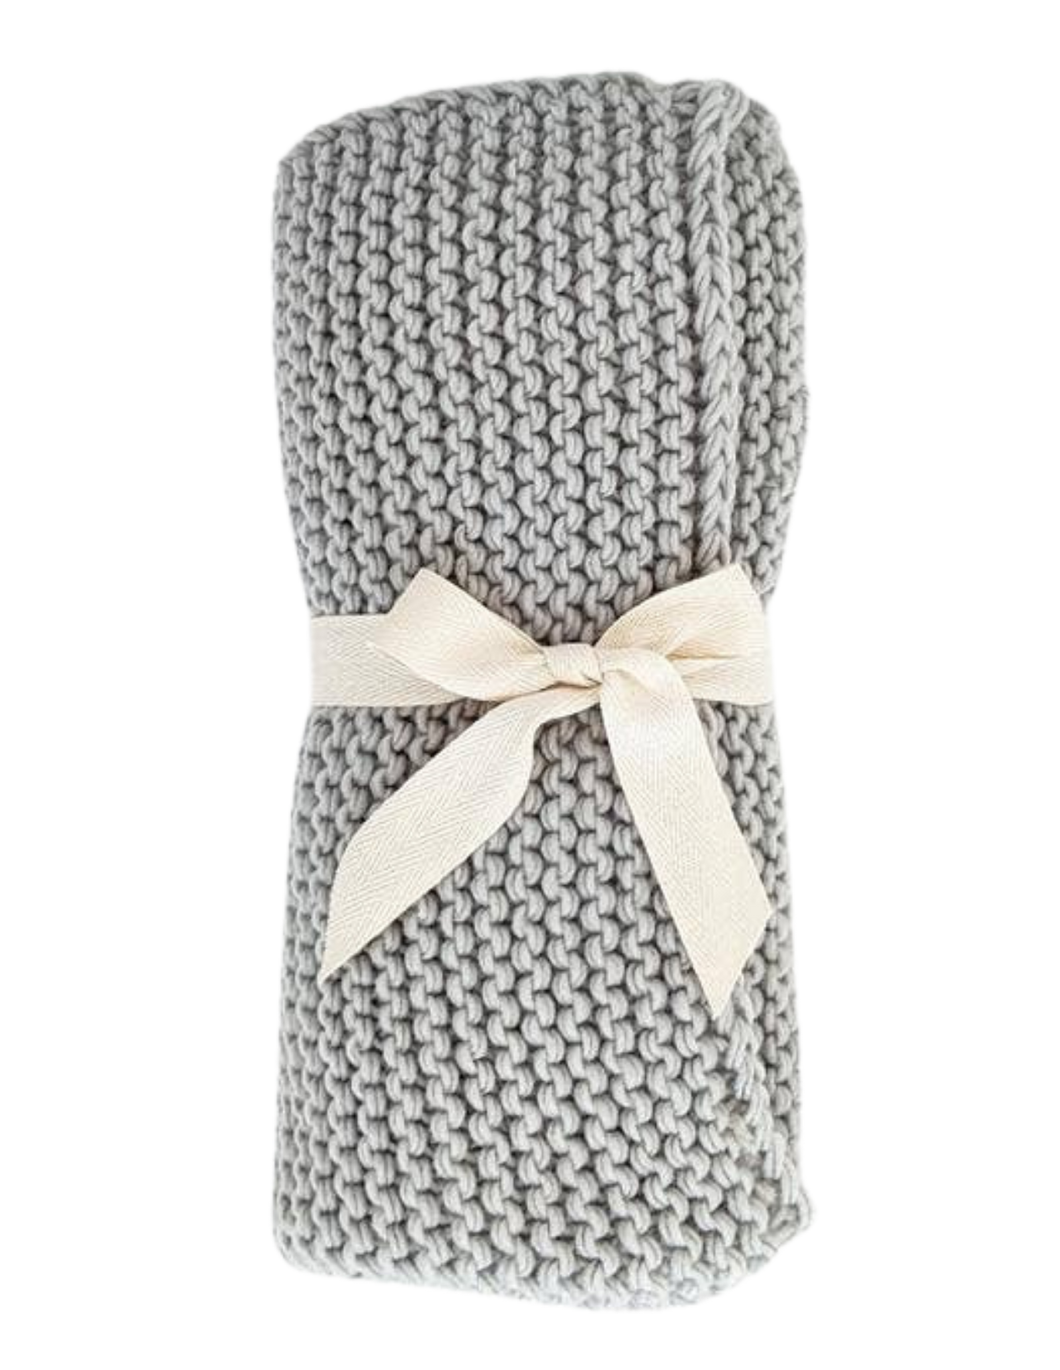 Dove Grey Garter Stitch Knit Blanket - CovetedThings